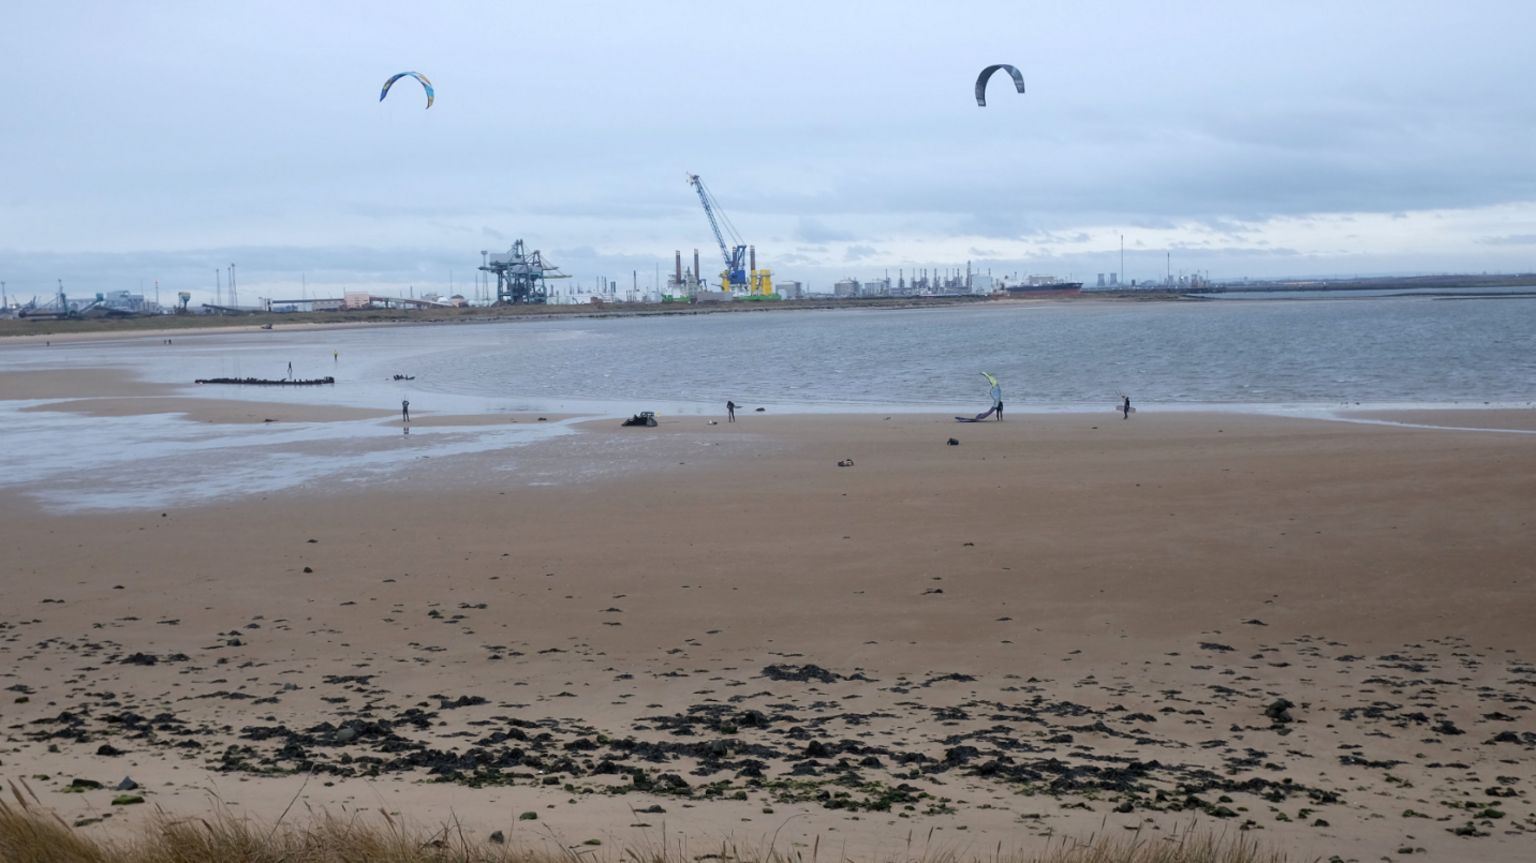 A sandy beach with cranes in the background